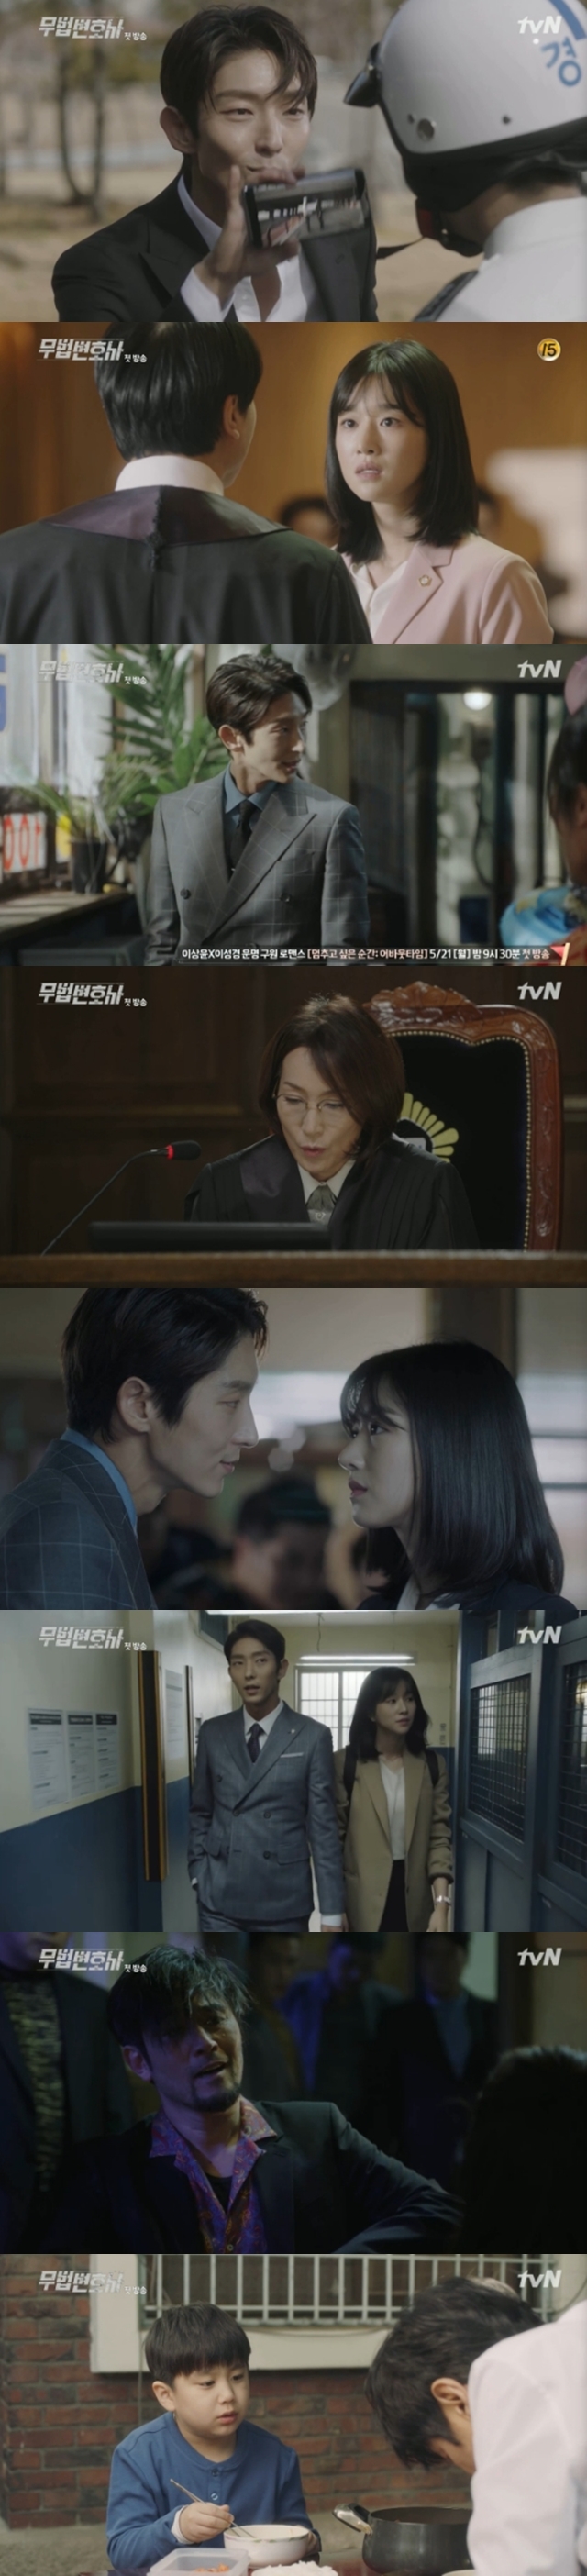 Lee Joon-gi set to dig into the death of his mother Shin Eun-jungIn the first episode of TVNs new weekend drama, Lawless Lawyer (played by Yoon Hyun-ho/directed by Kim Jin-min/produced studio Dragon Rogos Film), which was first broadcast on May 12, Bong Sang-pil (Lee Joon-gi) and Seo Ye-ji became a family member of a Law Firm.Bong made his first appearance with intensity, capturing evidence to catch the police (Jin Seon-gyu). He returned to the big city, and then took over the office.He was going to set up a lawyers office.Ha Jae-yi, a lawyer, was angry at the judge who sentenced his wife to 20 years in prison for killing Husband, who committed domestic violence.When protested, the judge made sexist remarks, and Ha Jae-yi was punched at him and suspended; he was also fired from Law Firm.Bong Sang-pil and Ha Jae-yi passed through the court where Cha Moon-sook became a judge, and Ha Jae-yi went to his father, Ha Gi-ho (Lee Han-wi), who was in the established state after being cut off from the Law Firm.Then, with my father, I saw Ha Jae-sooks trial. Bong Sang-pil was there, too.After that, Ha Jae-yi came to the photo shop of Hagiho and went to the office of the blackmail - Cinémix Par Chloé, and confronted Bong Sang-pil and punched him.After that, Bong Sang-pil visited Ha Jae-yi.He knows that Ha Jae-yi has been suspended. My father has a debt to us, but there is no way to repay it, and he is unsportsmanlike to write a memorandum of abandonment.I will be a partner lawyer if the suspension is lifted, Ha Jae-yi refuted, but Bong Sang-pil left.Ha Jae-yi eventually became Bong Sang-pils lawless secretary.The past of Bong Sang-pil was also revealed on the day. Young Bong Sang-pil (the good man) witnessed the death of Choi Jin-ae (Shin Eun-jung), a human rights lawyer.On the day of his murder, Choi received a blackmail – Cinémix Par Chloé from An-oh (Choi Min-soo) to ask where the memory card is.Young Bong Sang-pil was hiding in his office, but he was caught. Choi Jin-ae handed a memory card to see if the young Bong Sang-pil would be dangerous, and young Bong Sang-pil swallowed it.An Oju, who was angry, stabbed Choi Jin-ae with a knife.Young Bong Sang-pil was caught by a police officer, Woo Hyung-man (Lee Dae-yeon), but he escaped safely due to a traffic accident.Choi Jin-ae, who had foresaw the danger, asked him to visit his uncle, For Heroes (the guide). Young Bong Sang-pil went to Choi For Heroes safely and became big under him.kim ye-eun